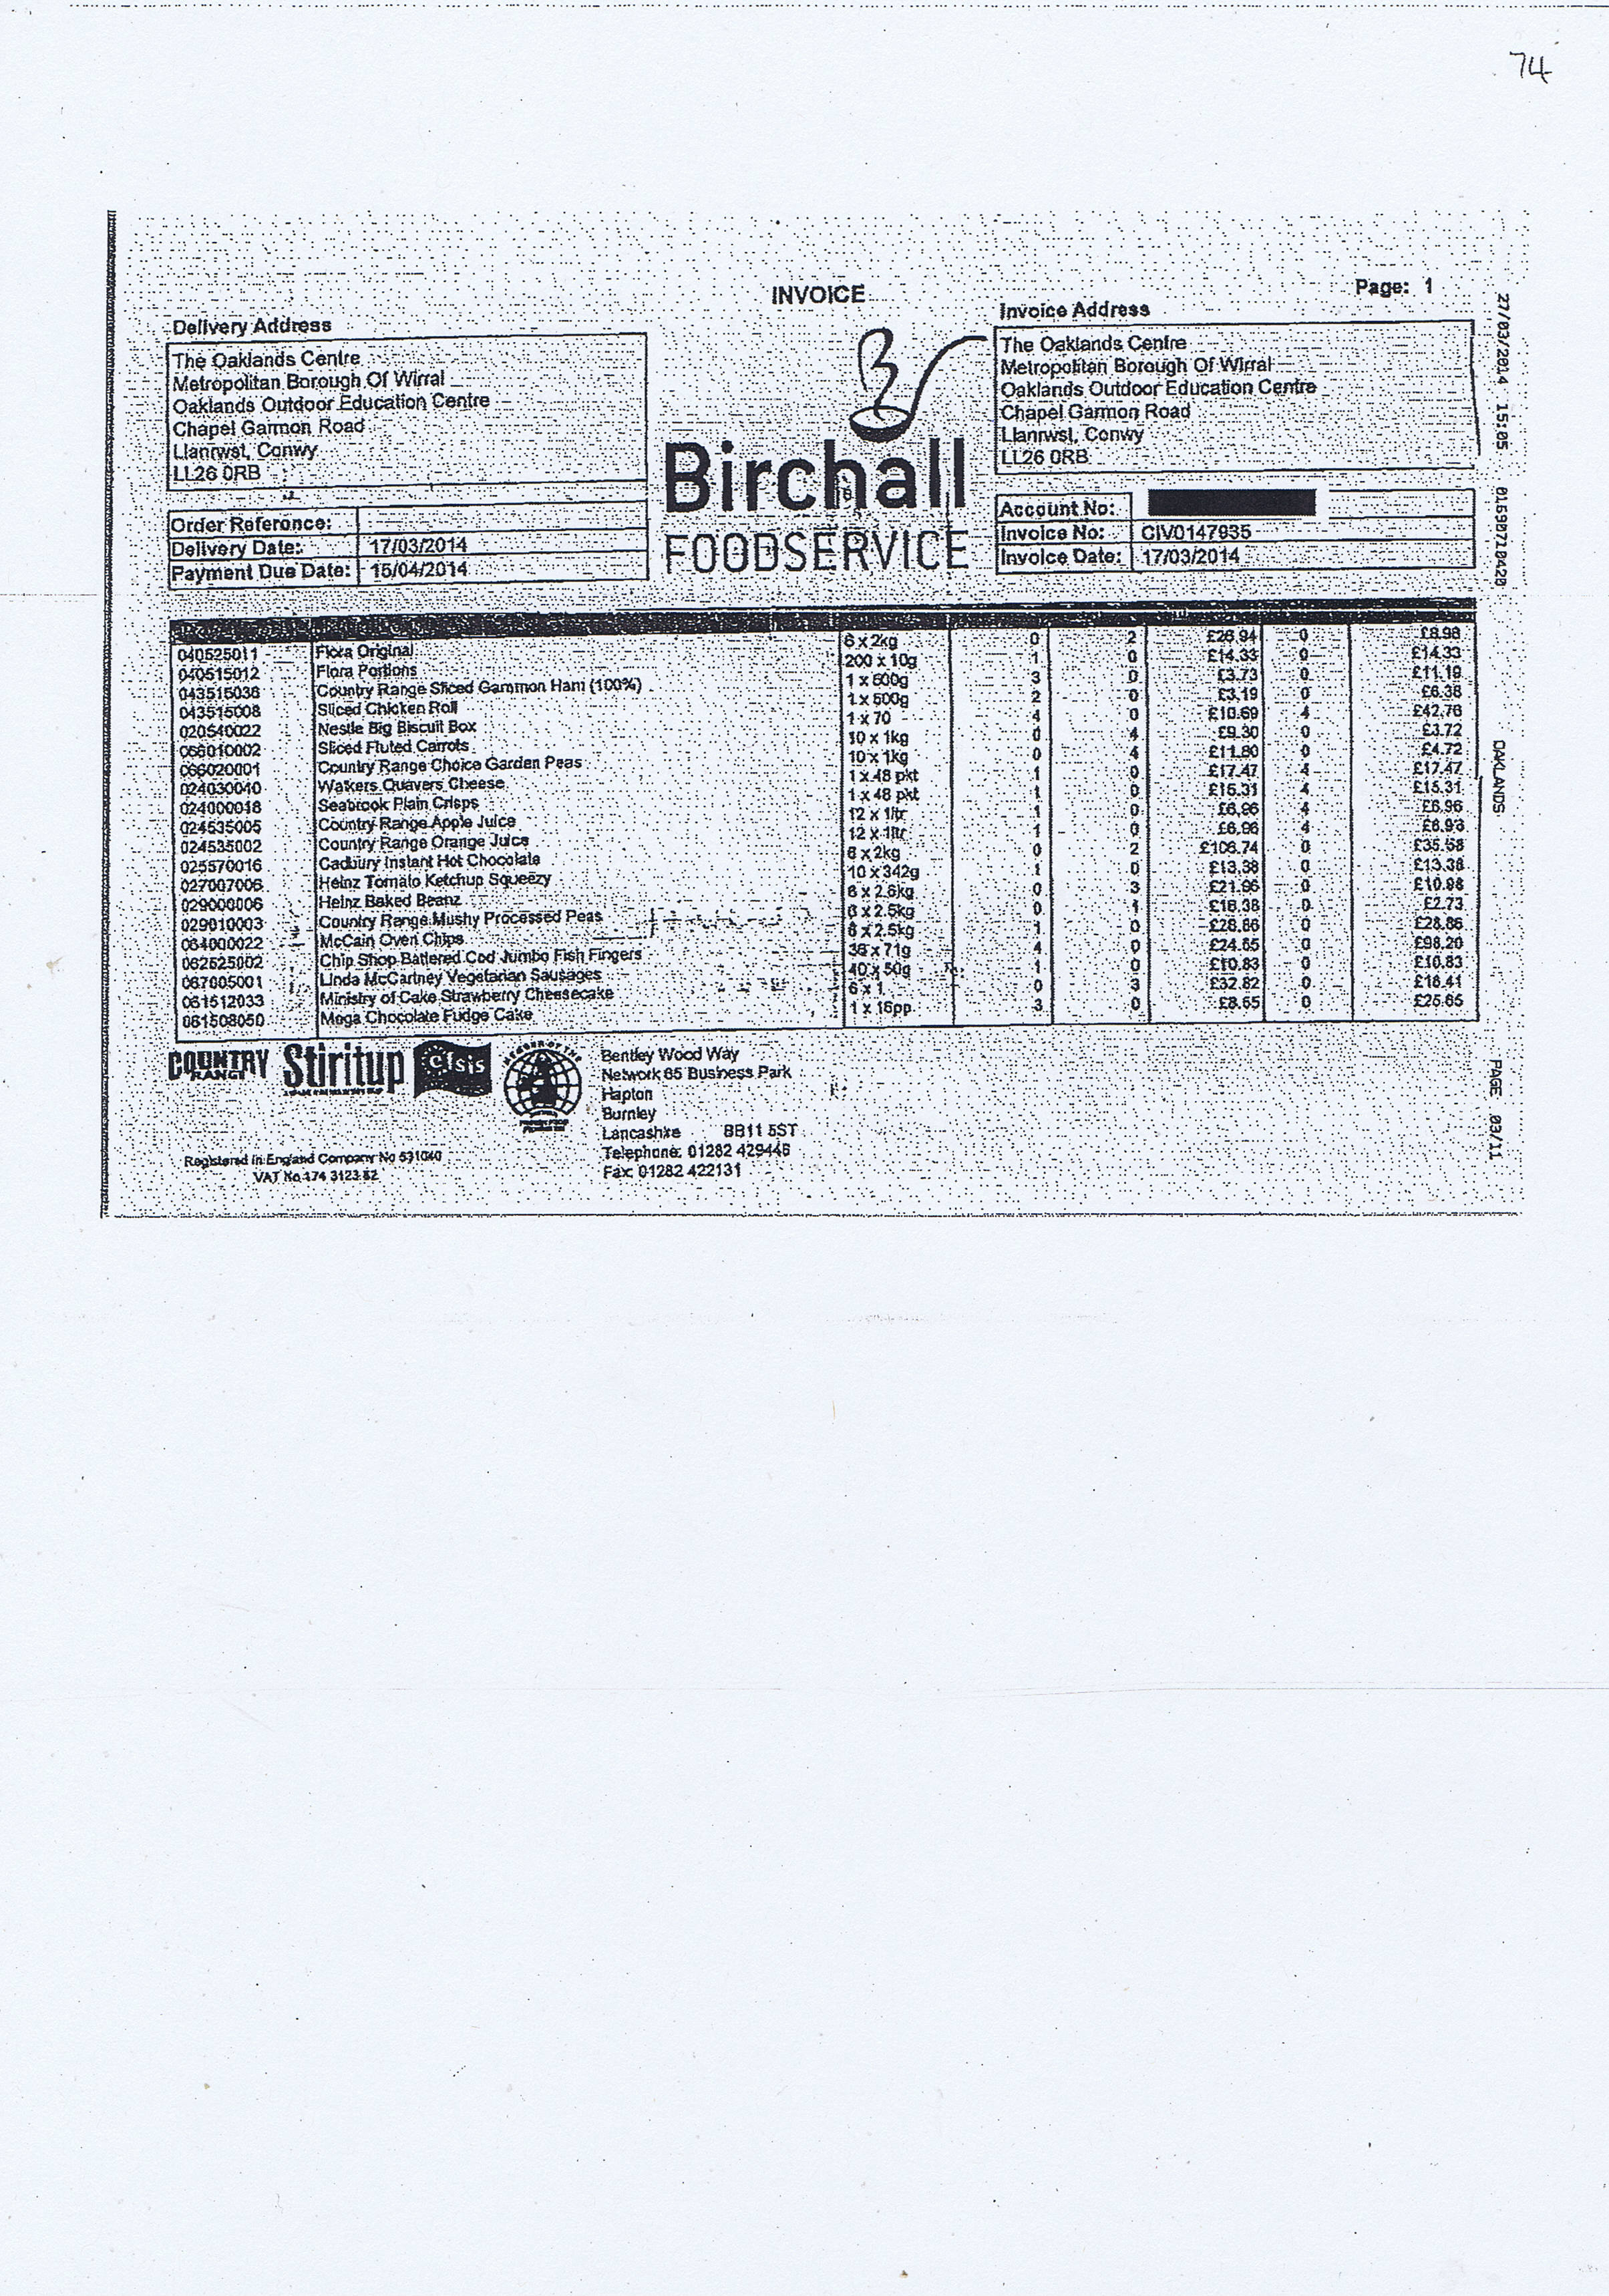 Wirral Council invoice 74 Birchall Foodservice £512.86 page 1 of 2